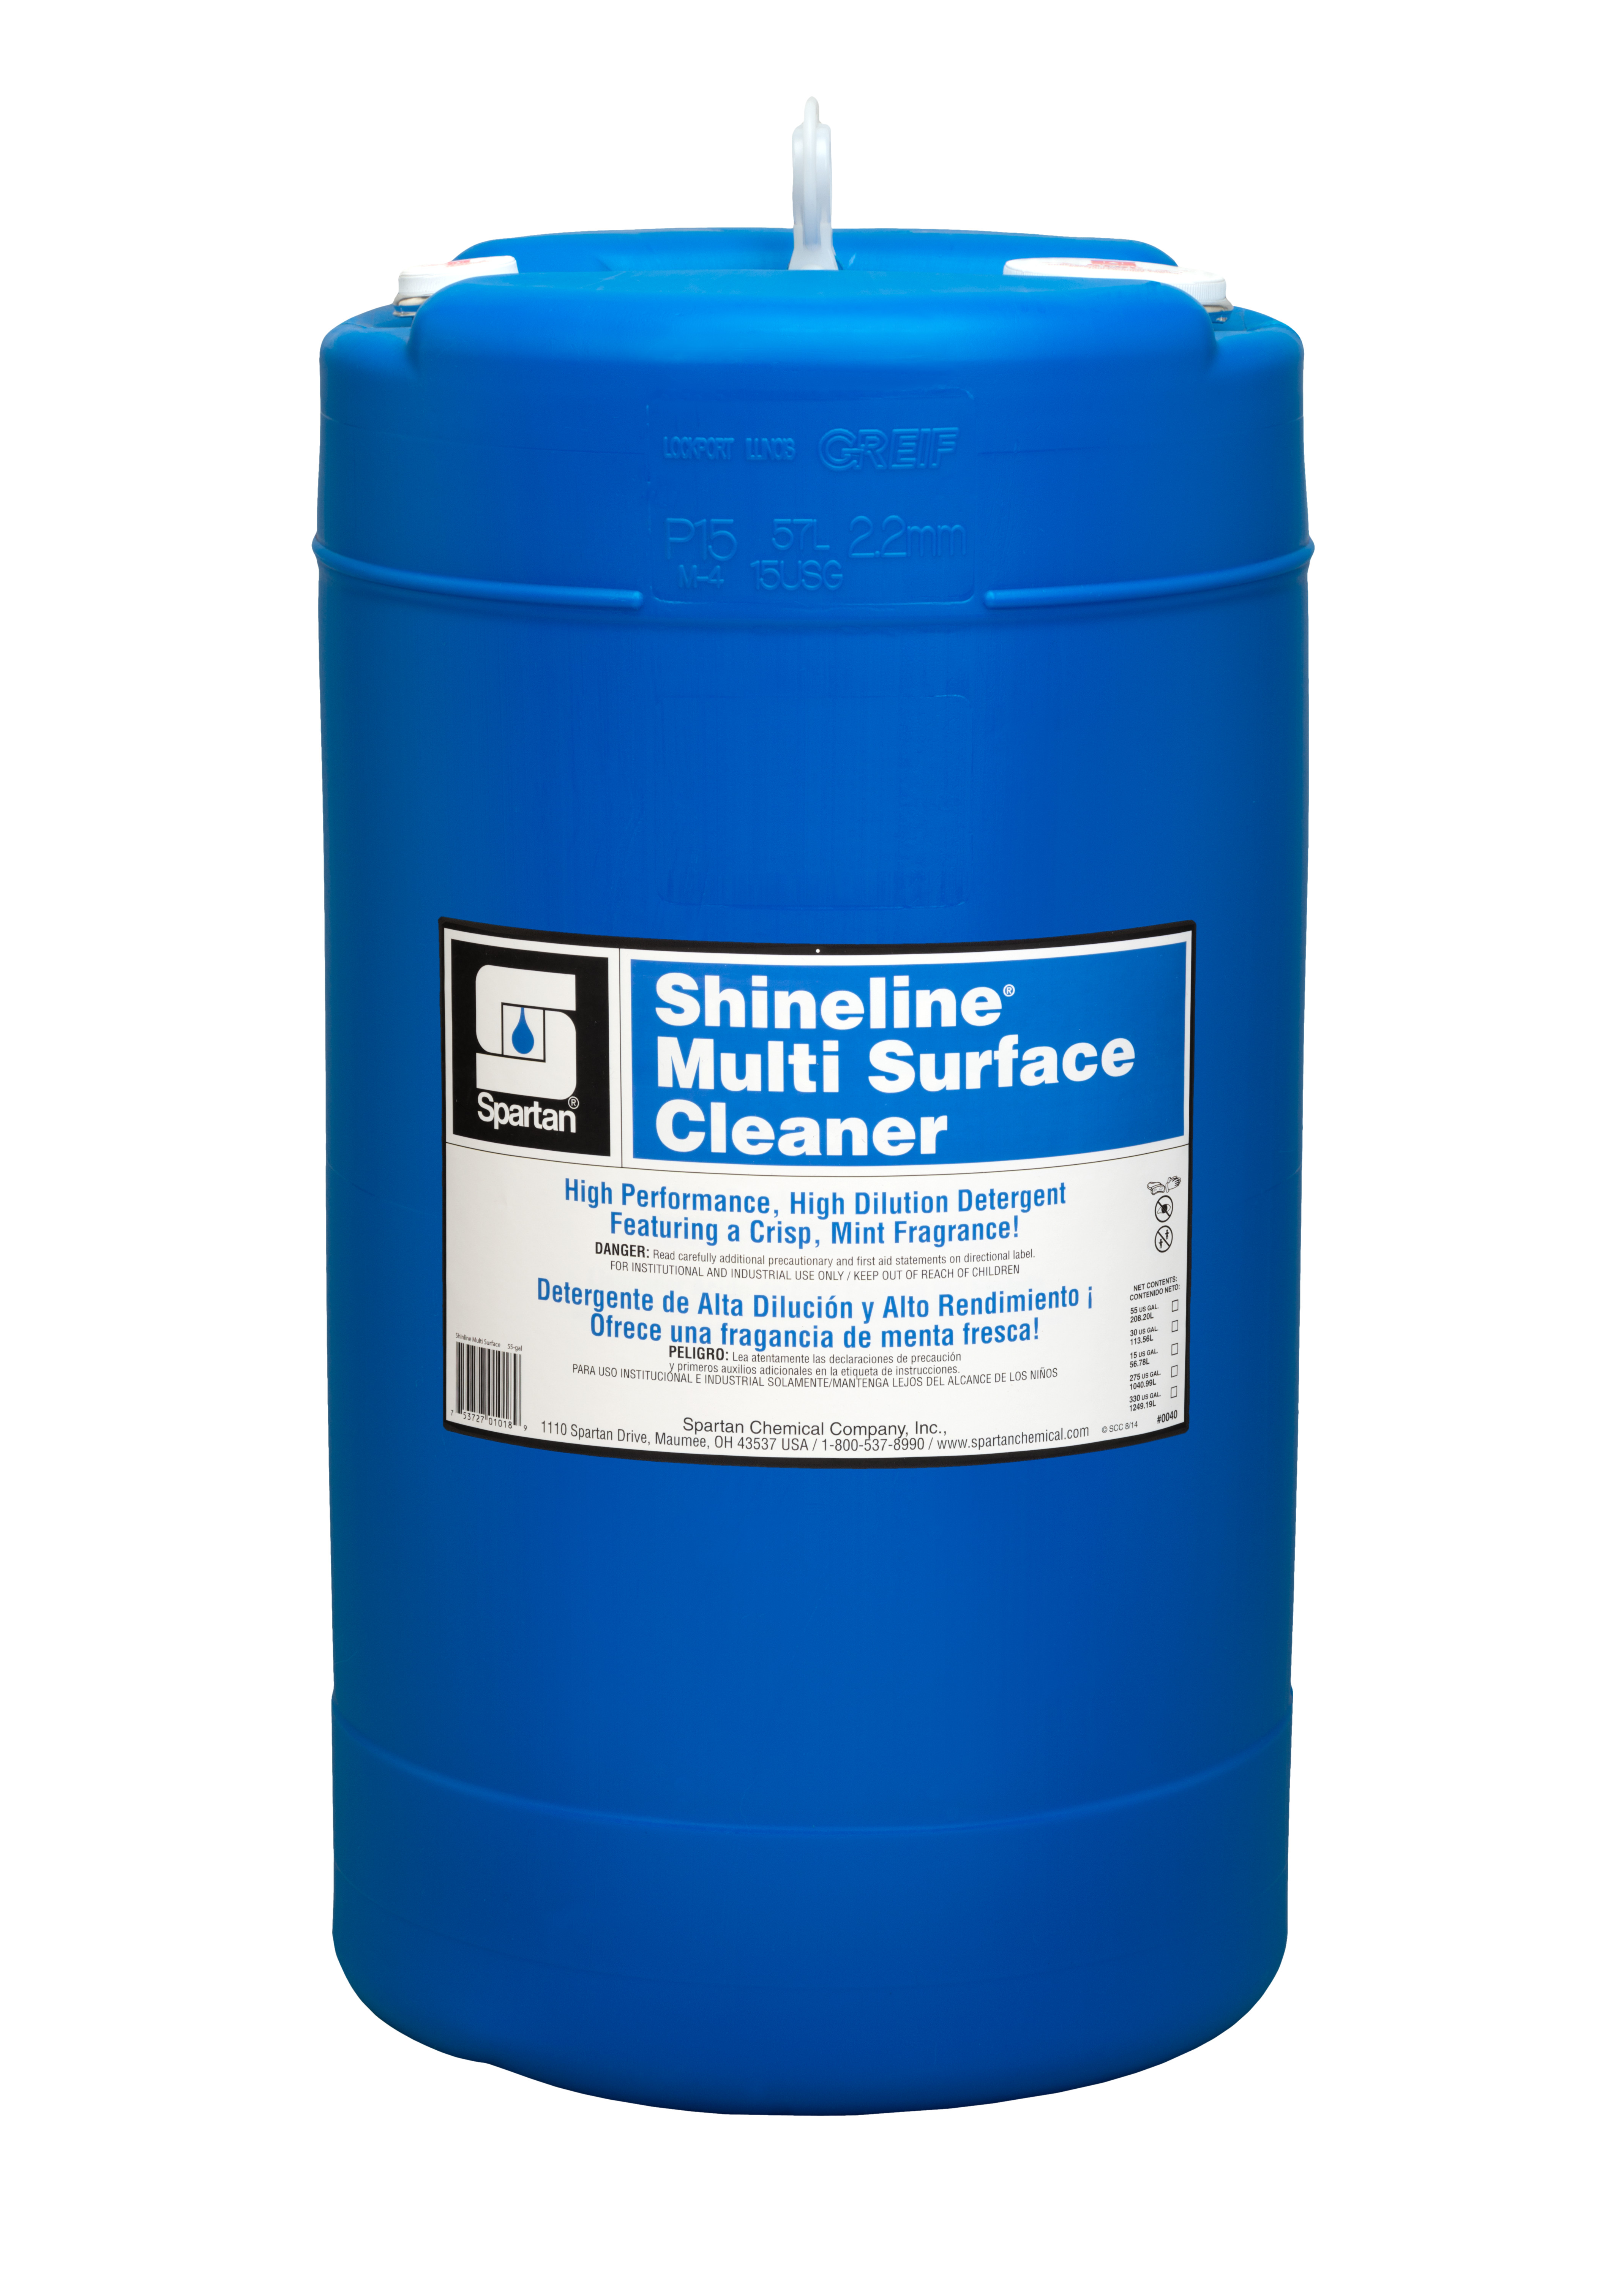 Spartan Chemical Company Shineline Multi Surface Cleaner, 15 GAL DRUM